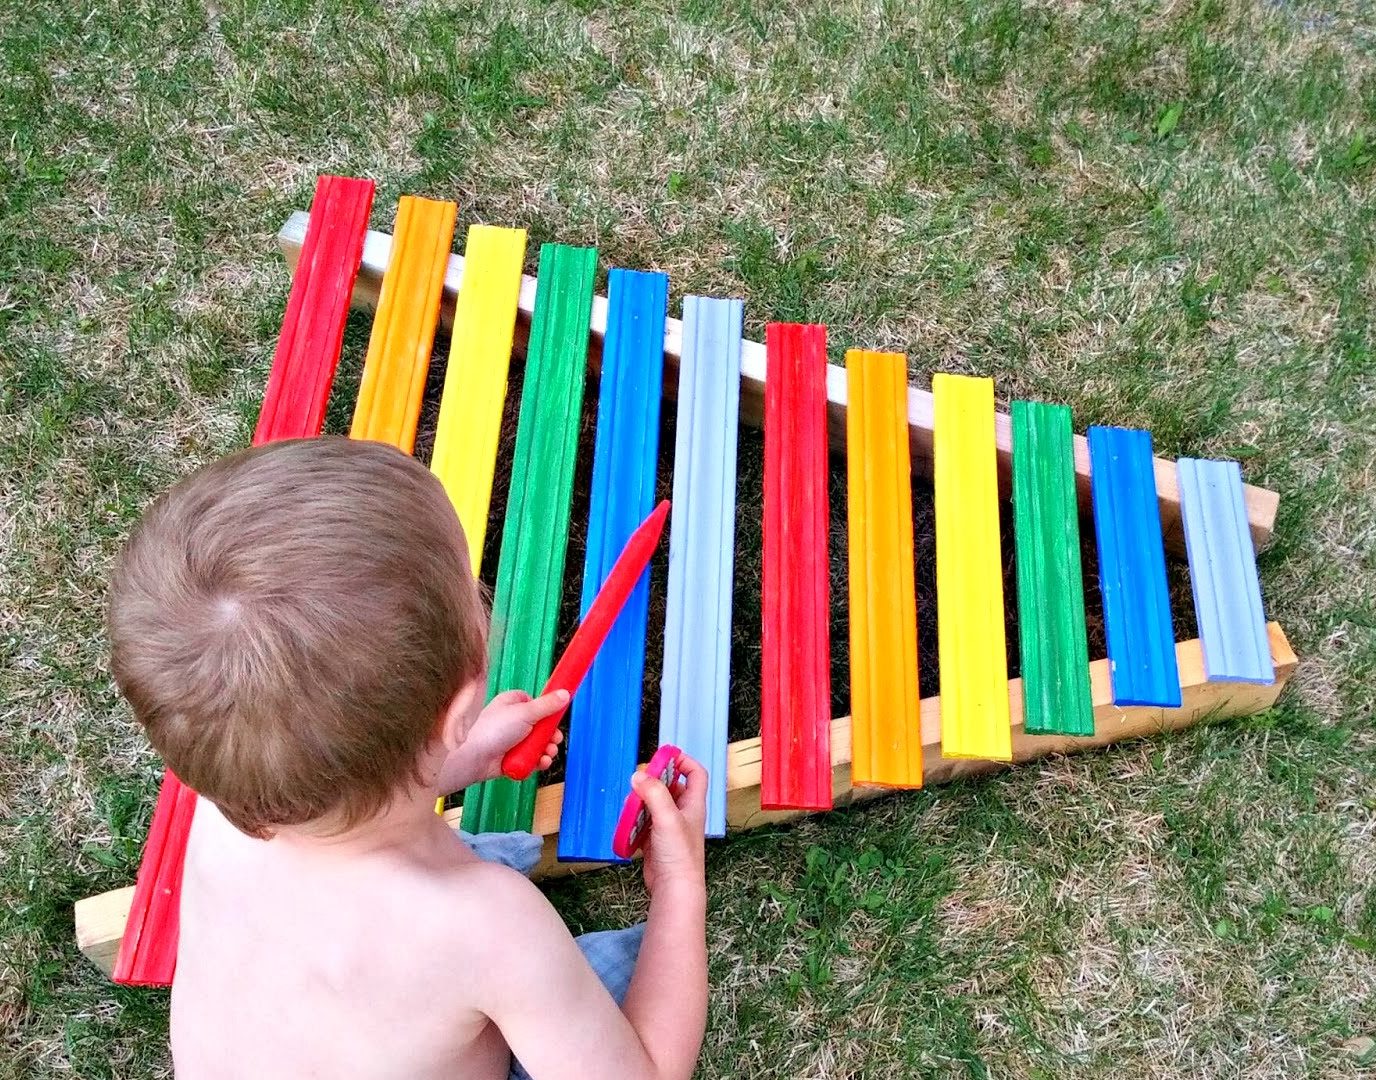 19 Homemade Musical Instruments for Kids1376 x 1080